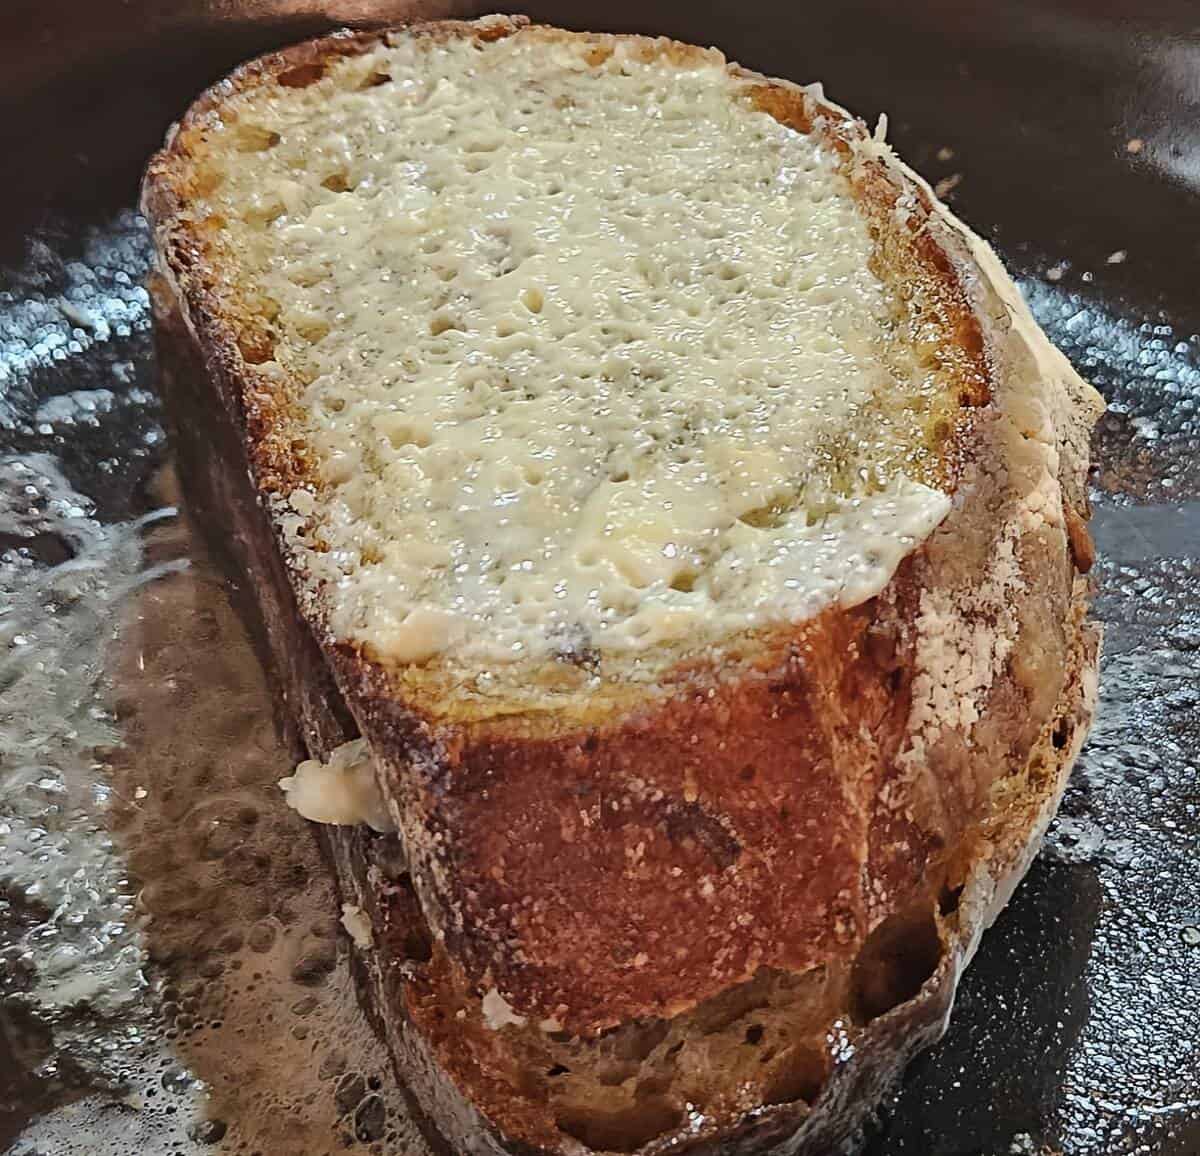 grilled cheese sandwich frying in pan, top bread showing slightly melted parmesan cheese crust